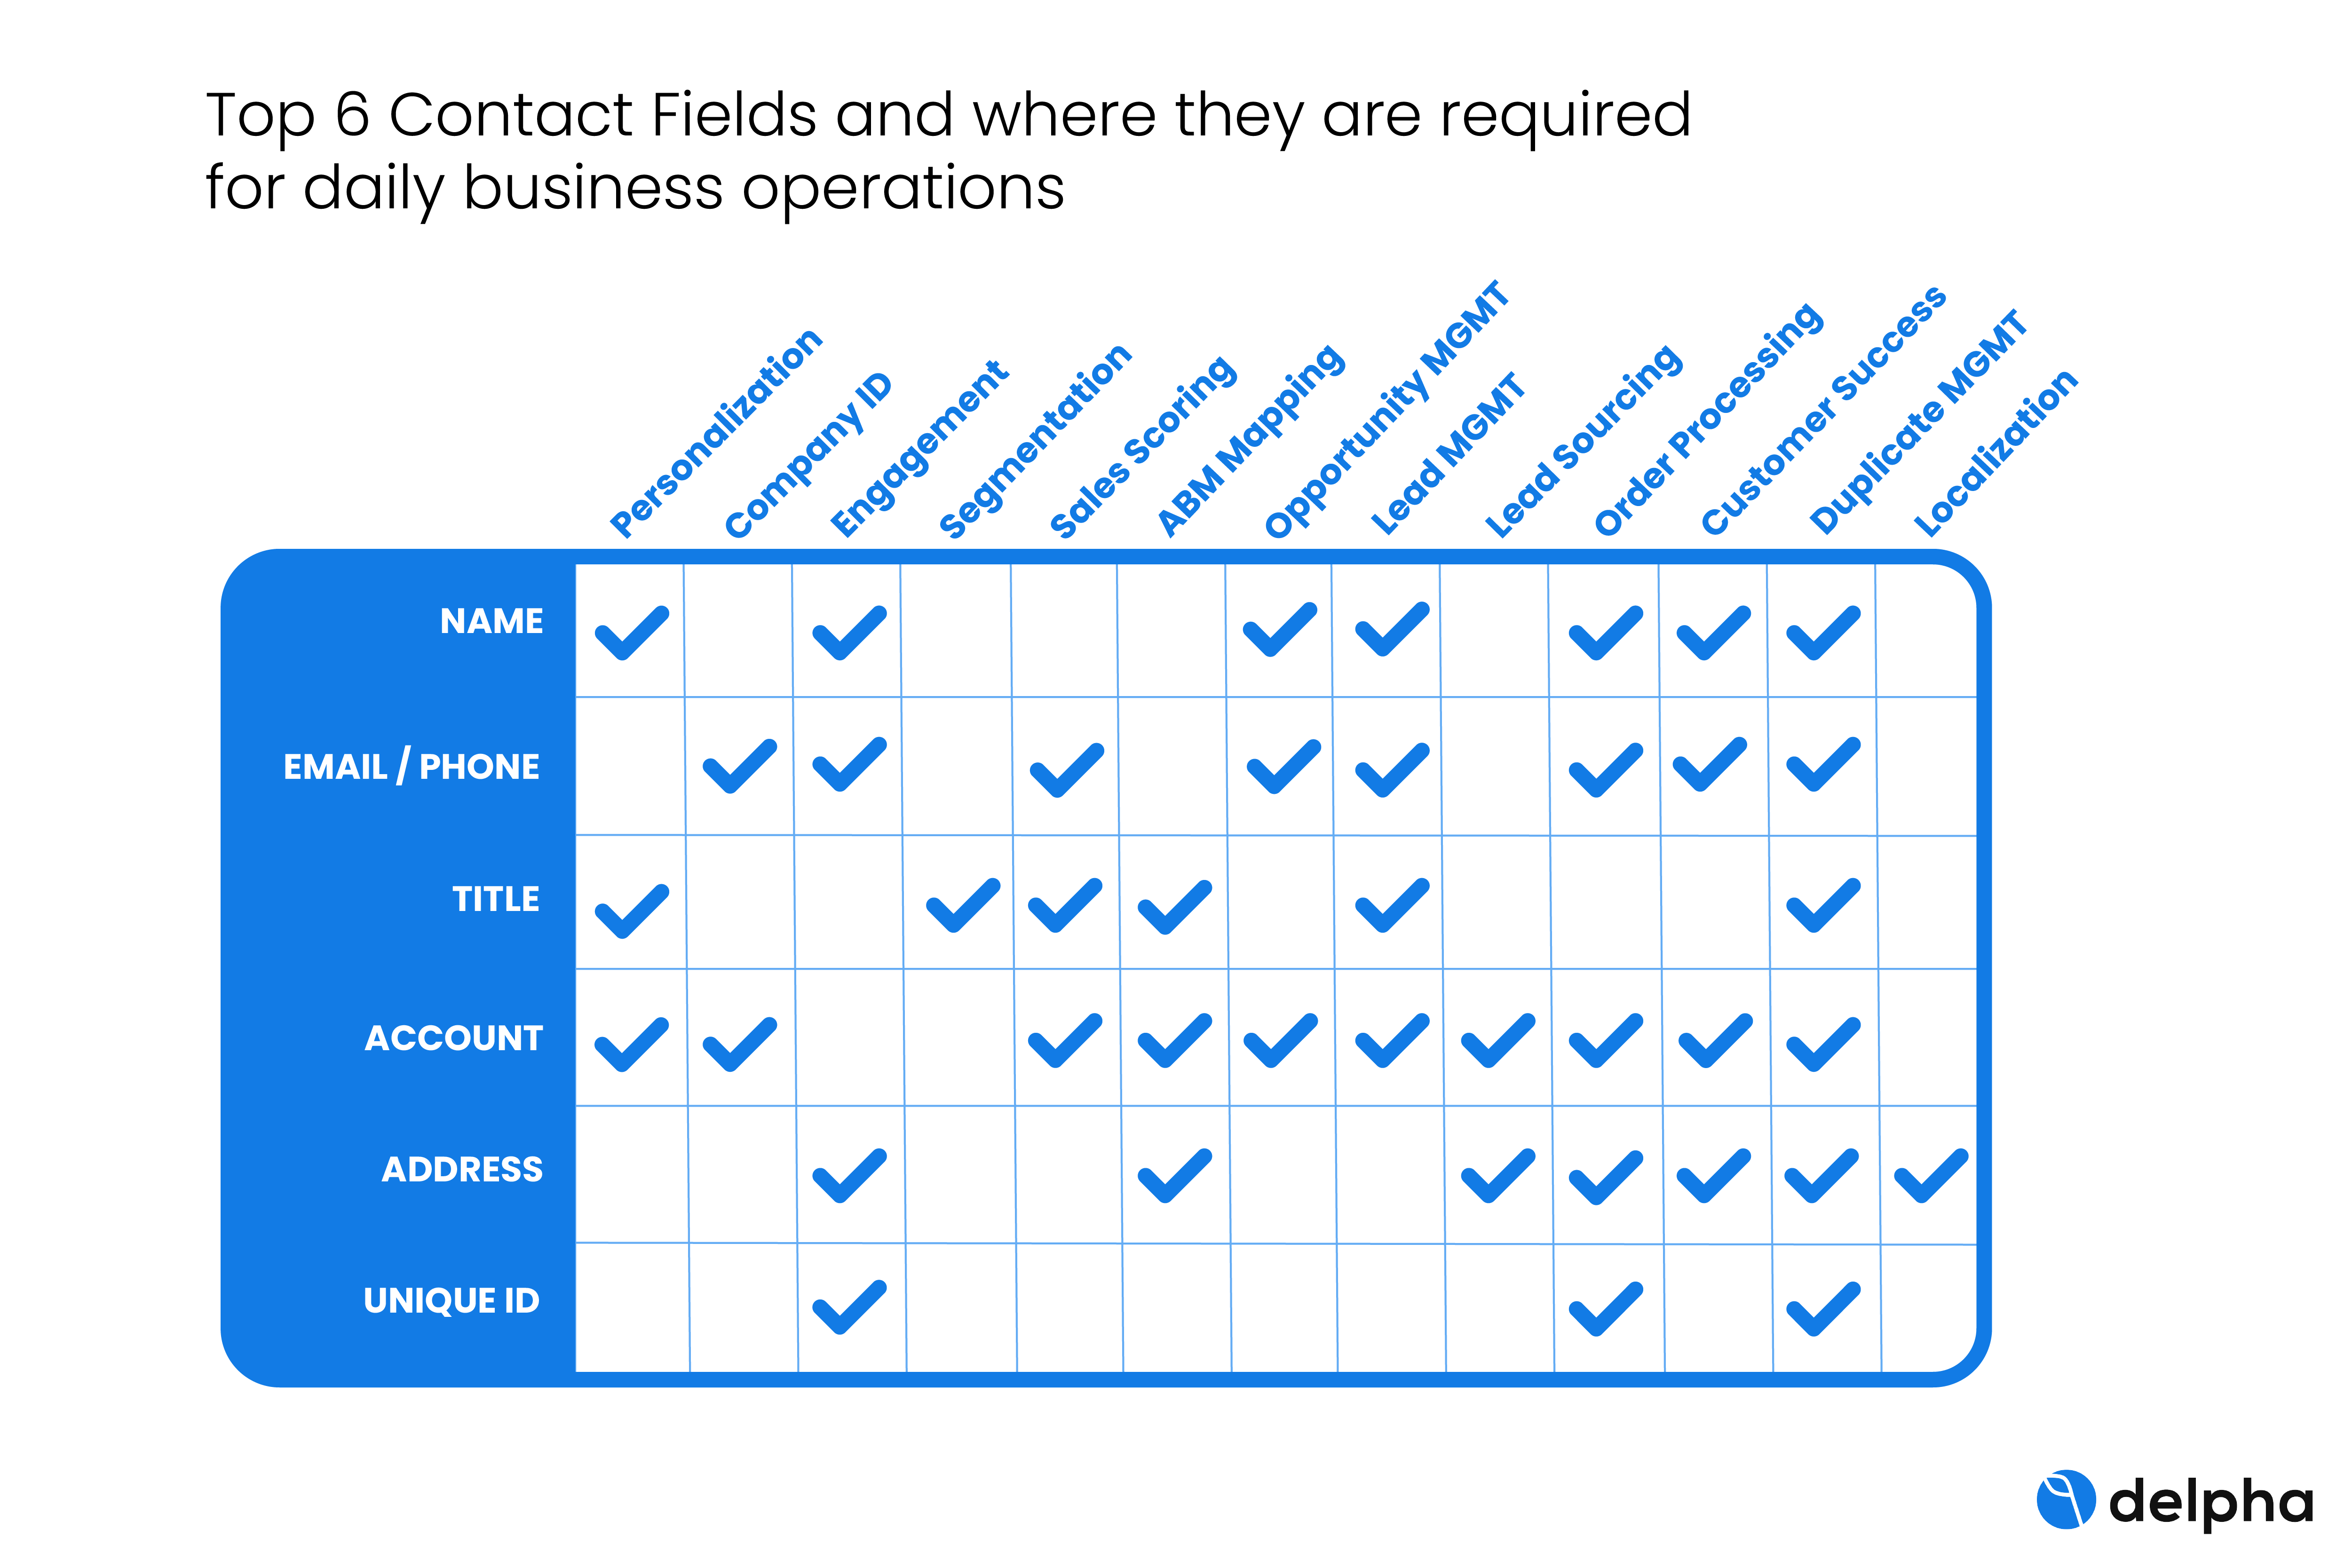 Top 6 contact fields for CRM admins and their business application.